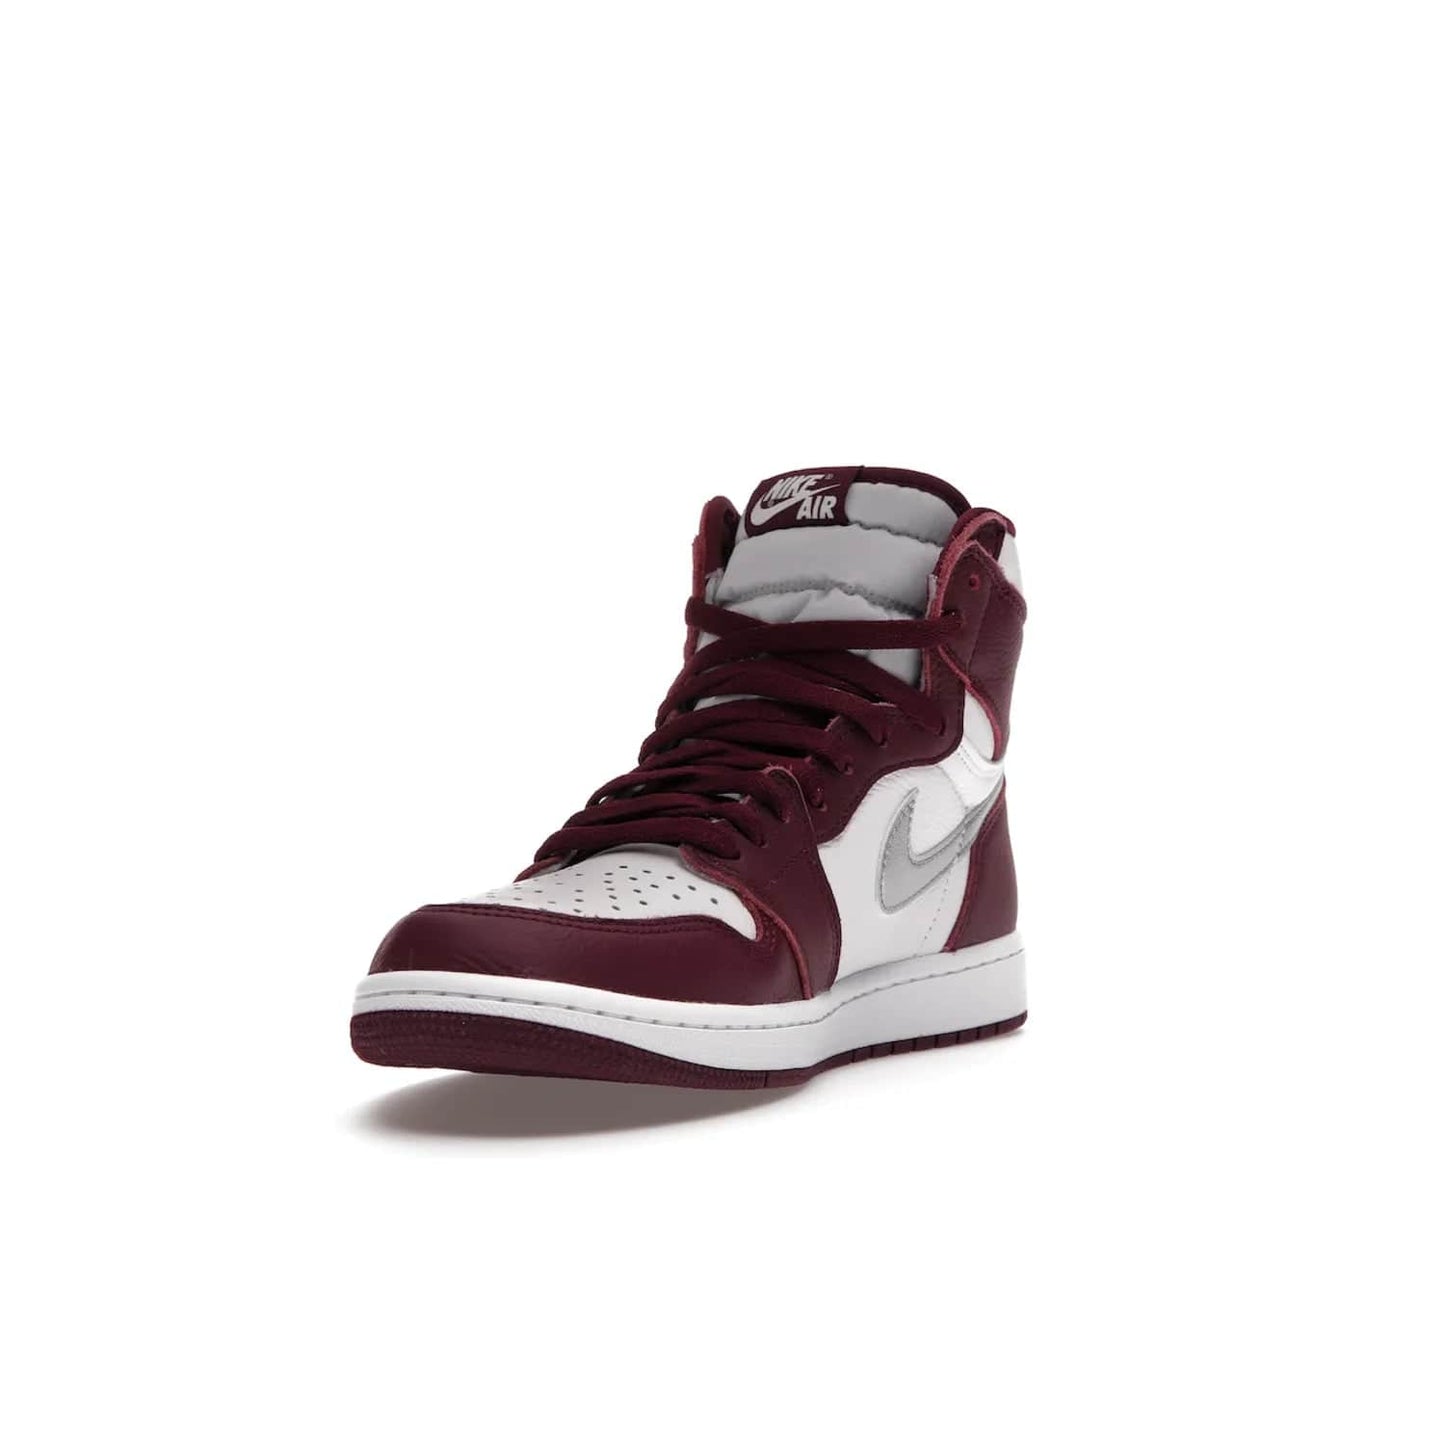 Jordan 1 Retro High OG Bordeaux - Image 13 - Only at www.BallersClubKickz.com - Shop the classic Air Jordan 1 High Bordeaux with a modern high-top cut. The timeless Bordeaux and White-Metallic Silver colorway, releasing Nov 20, 2021, is perfect for practice or a night out.